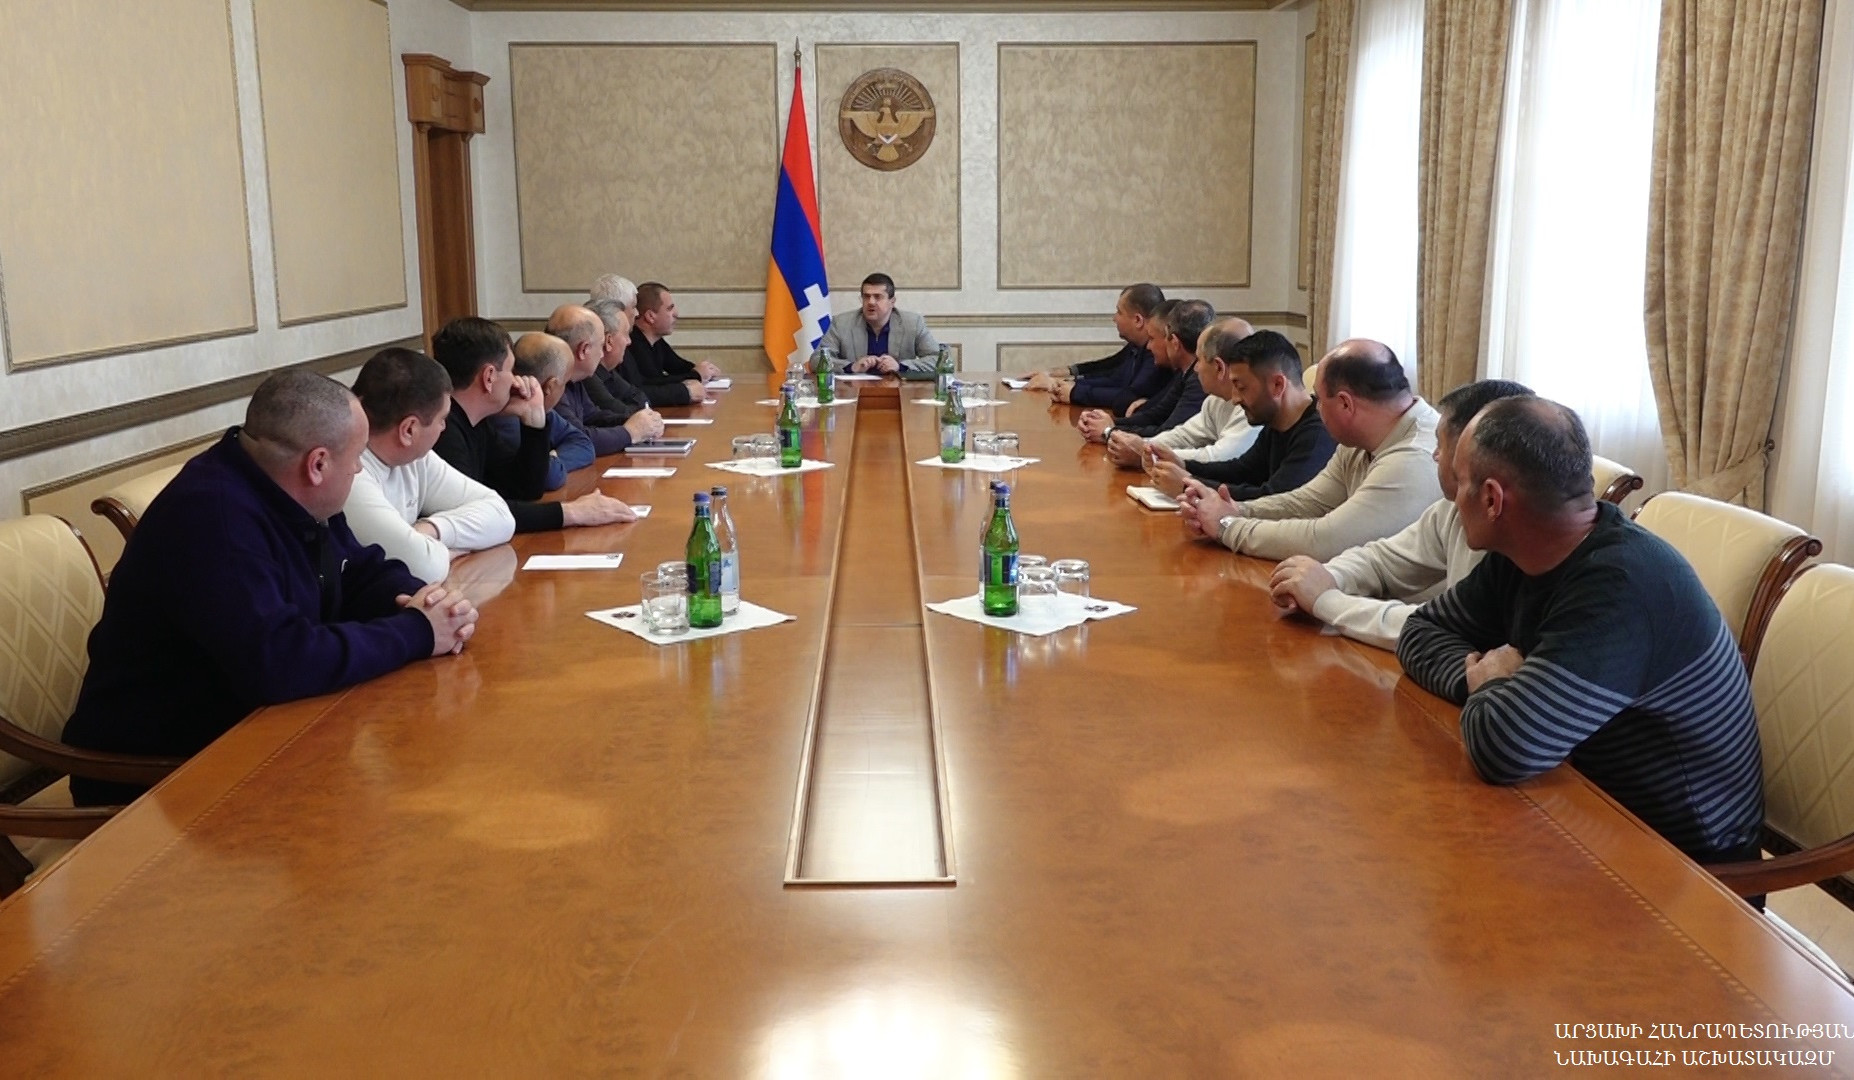 Negotiations can take place only in internationally recognized format: President of Artsakh